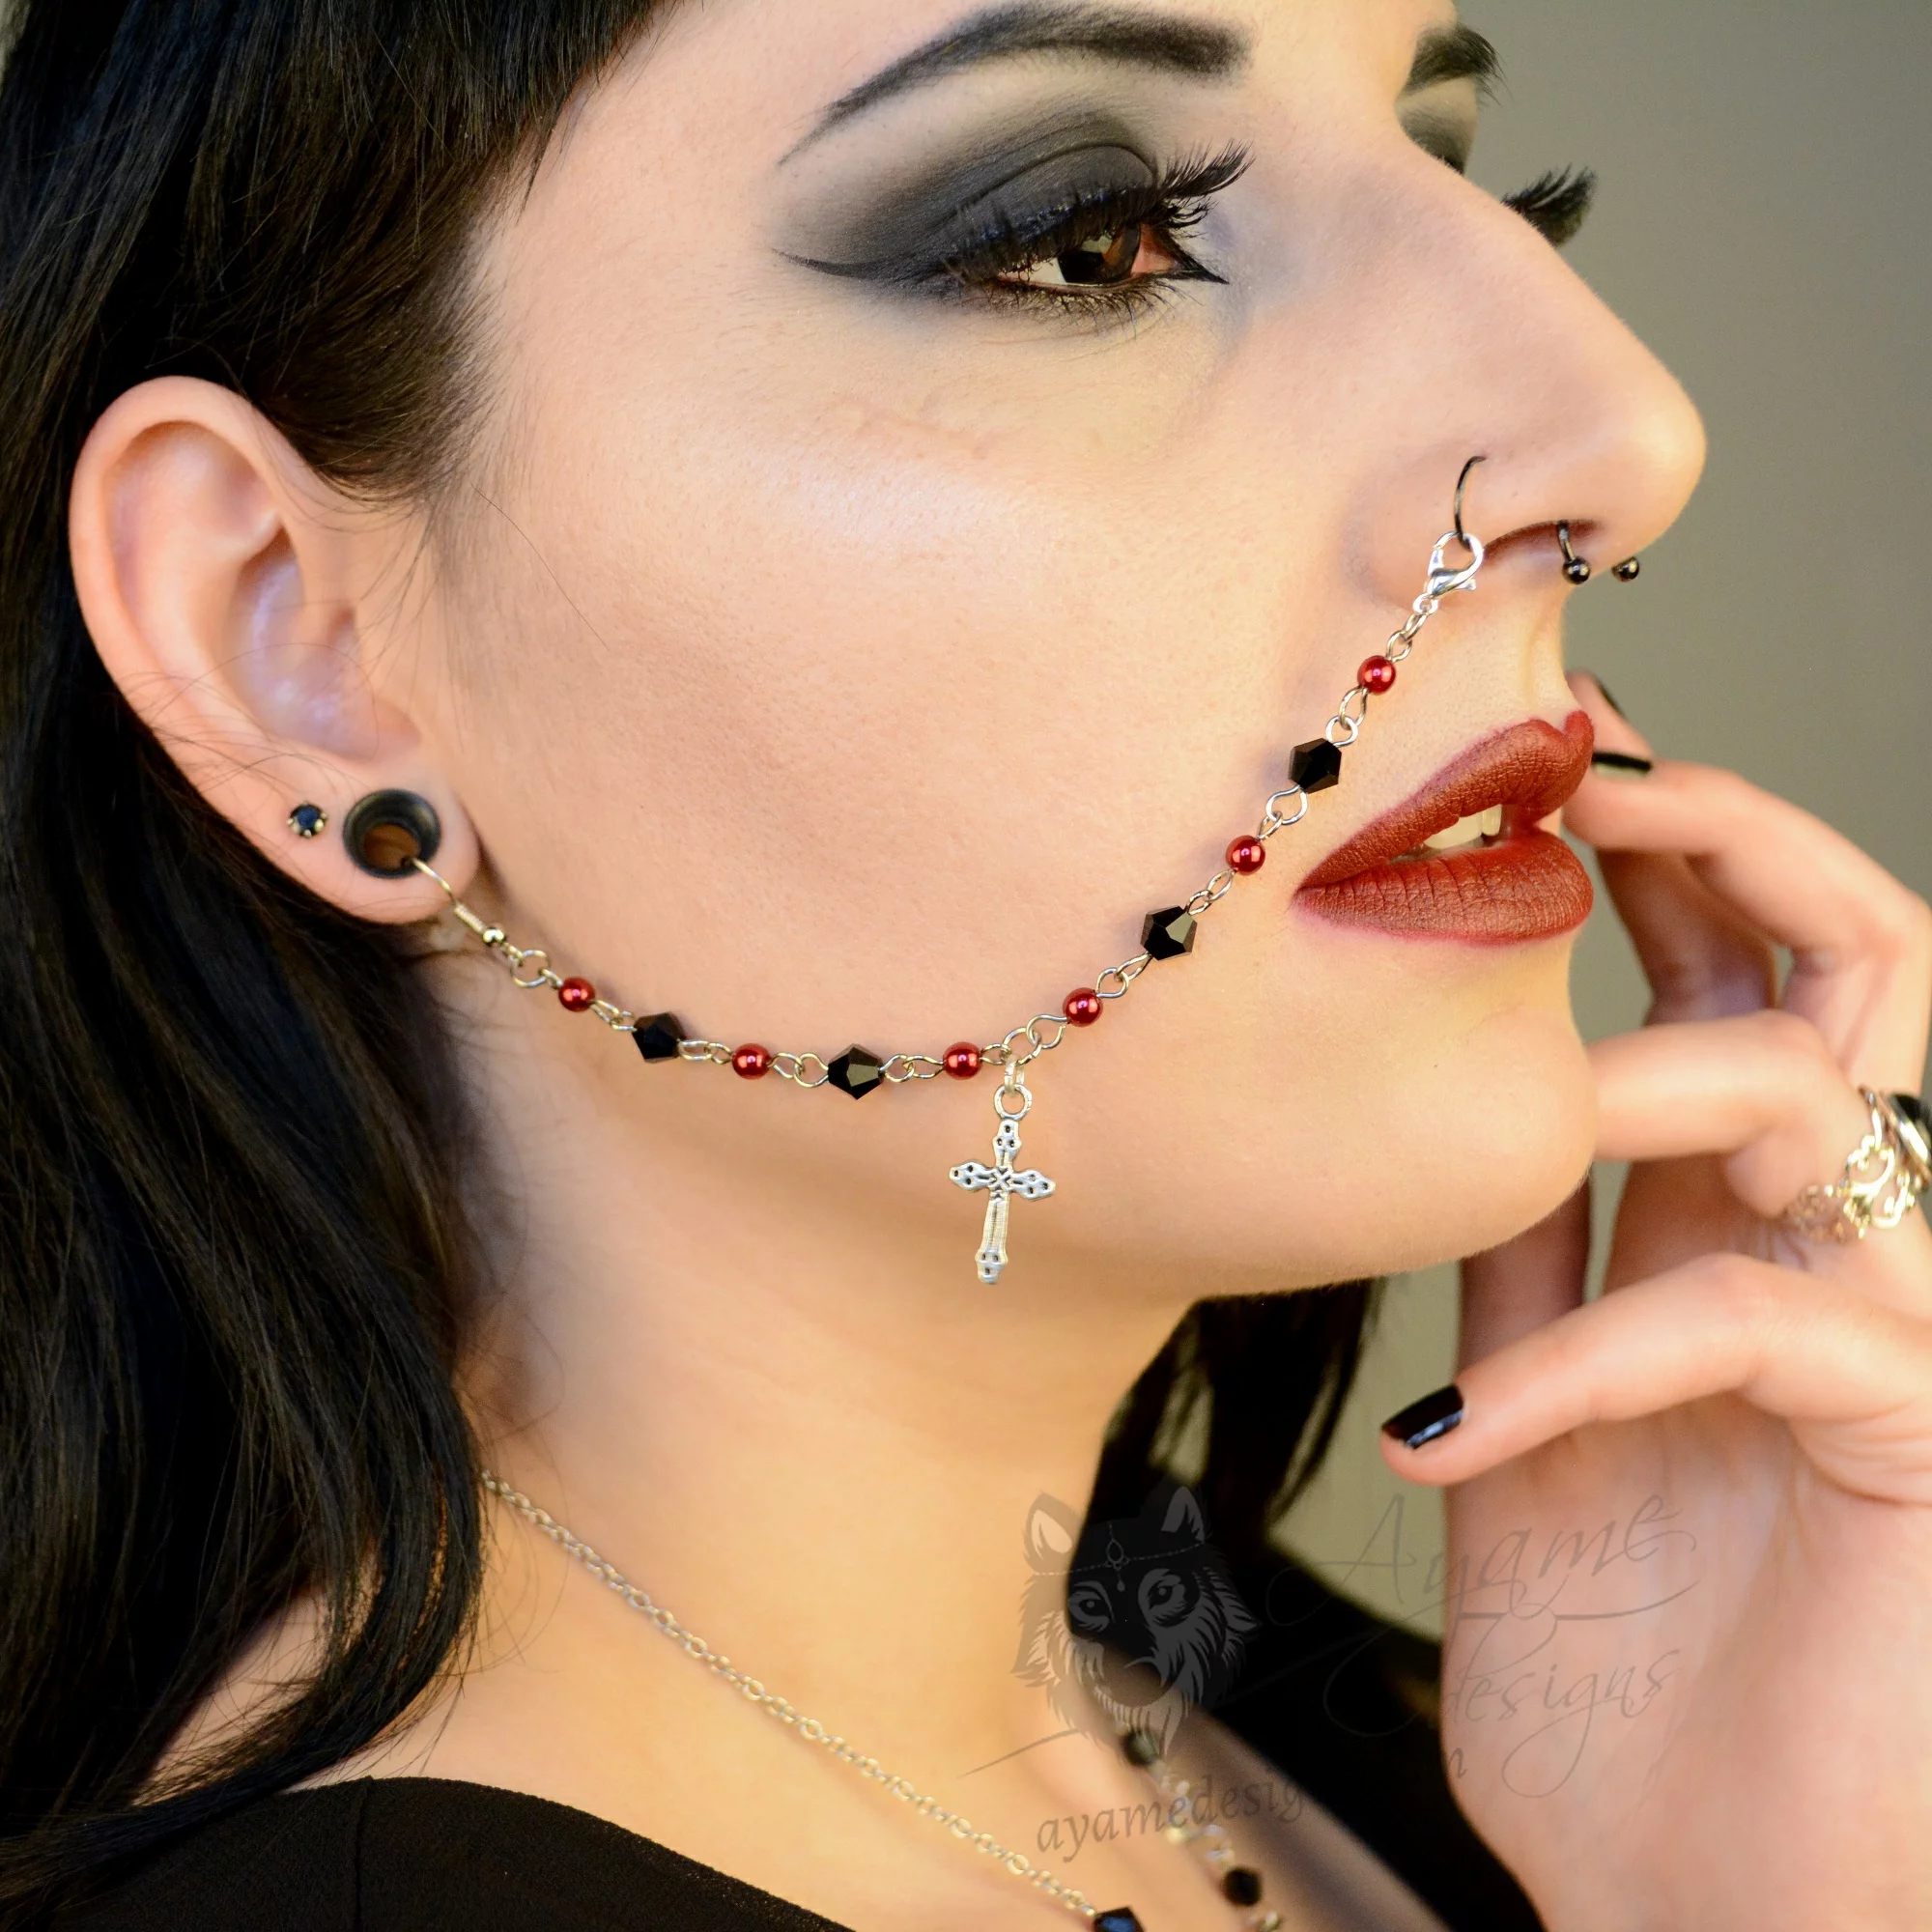 Handmade nose to ear chain with a cross charm, black Austrian crystal beads and red glass pearl beads